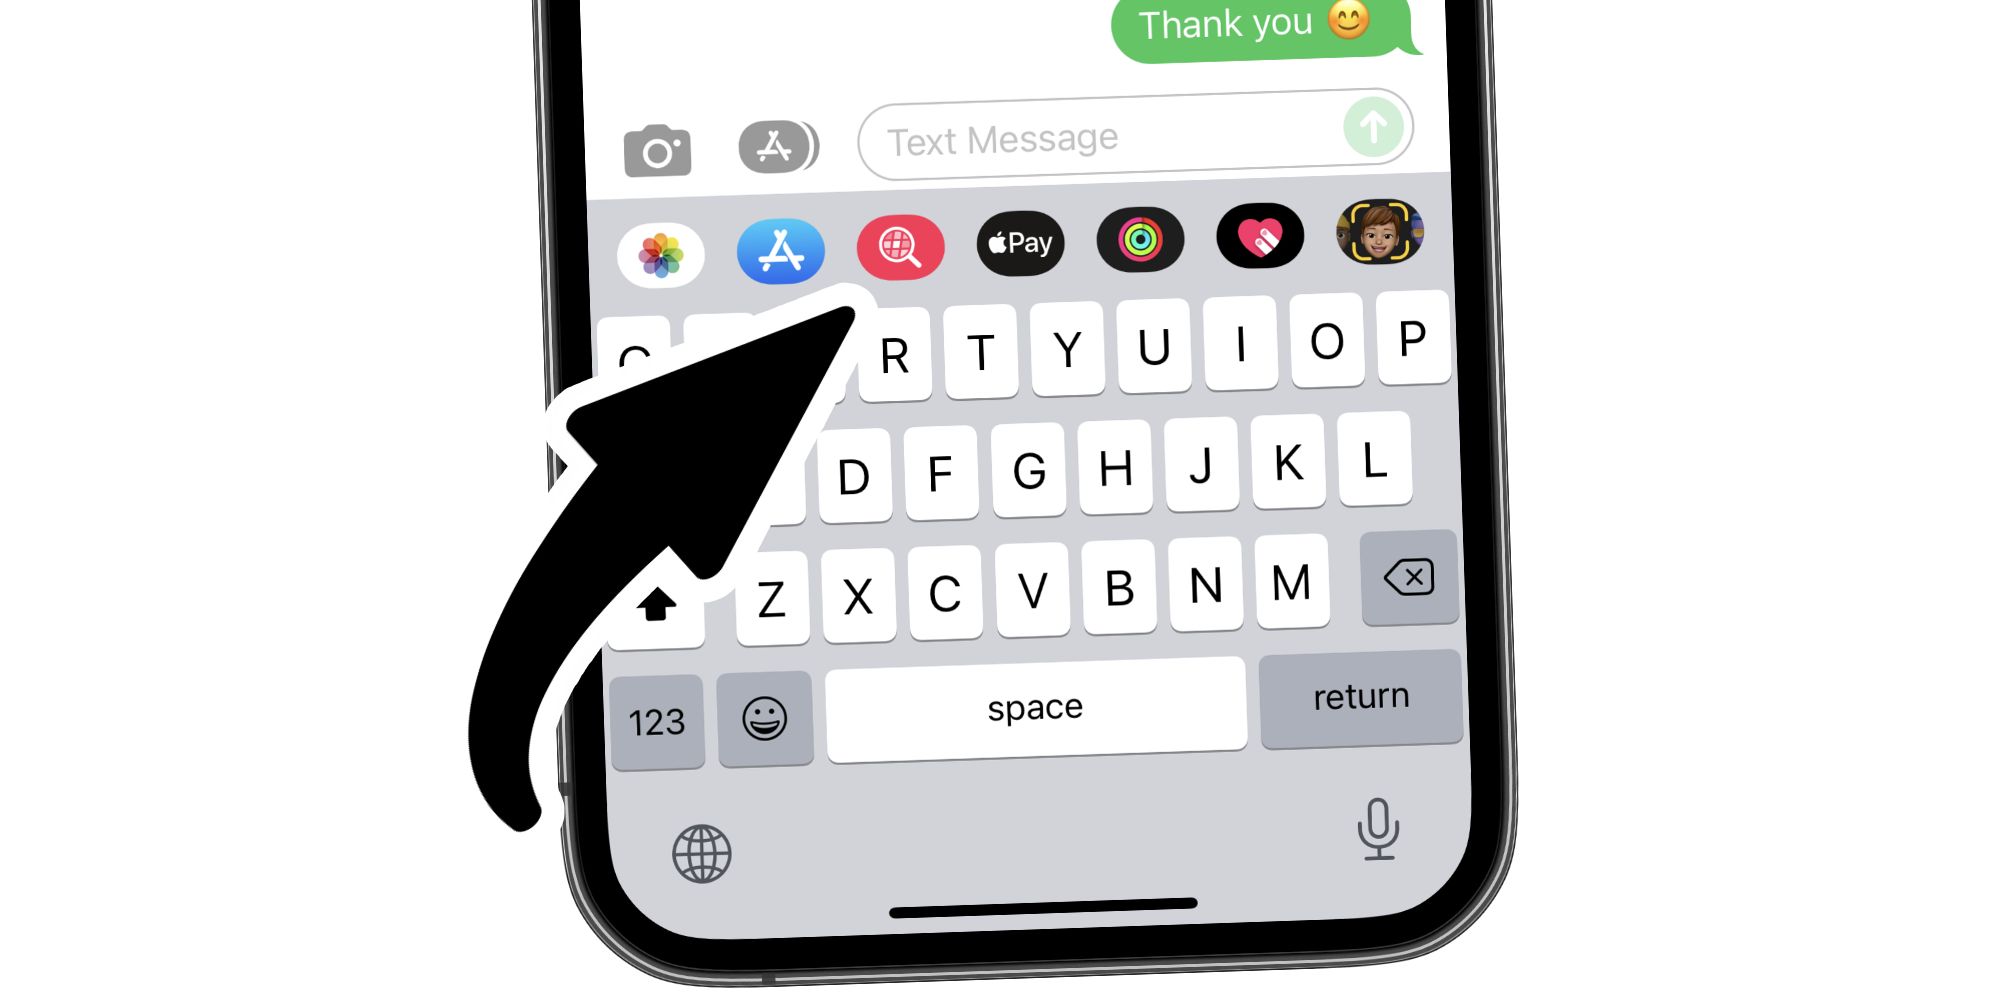 IPhone GIFs Not Working? Here’s What You Can Do To Fix Them